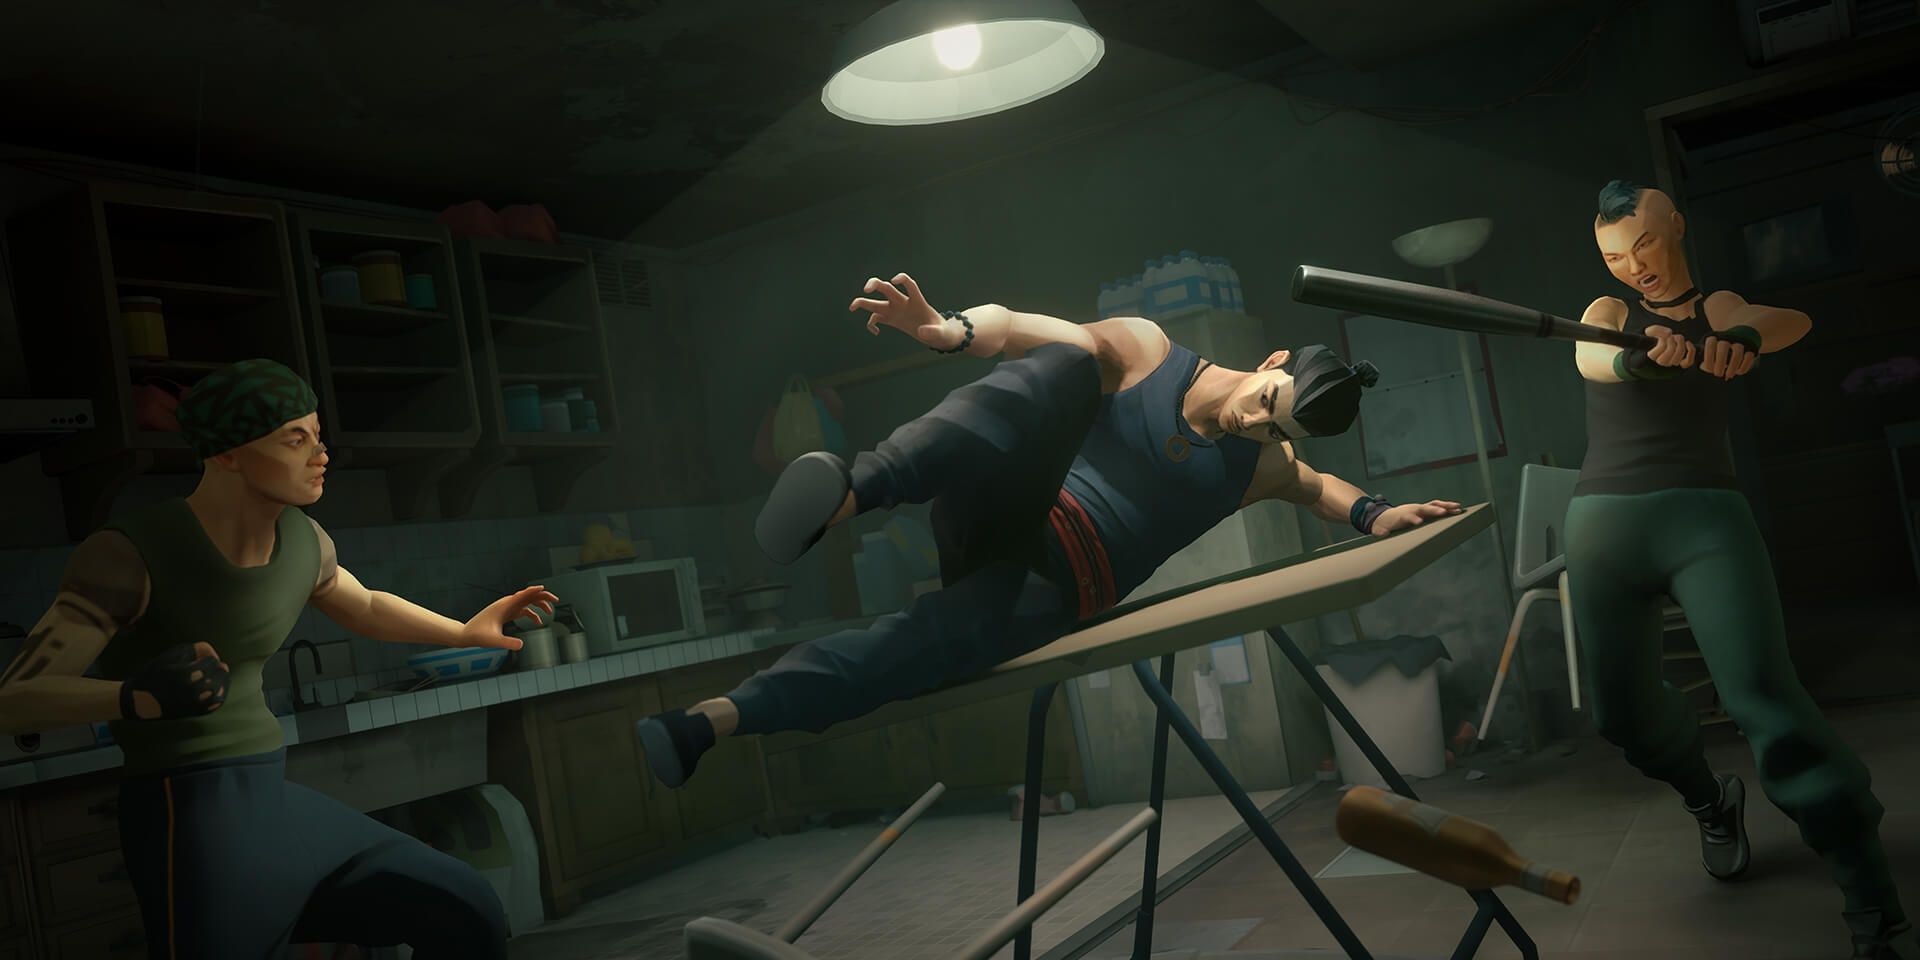 A screenshot showing the player vaulting over a table in Sifu